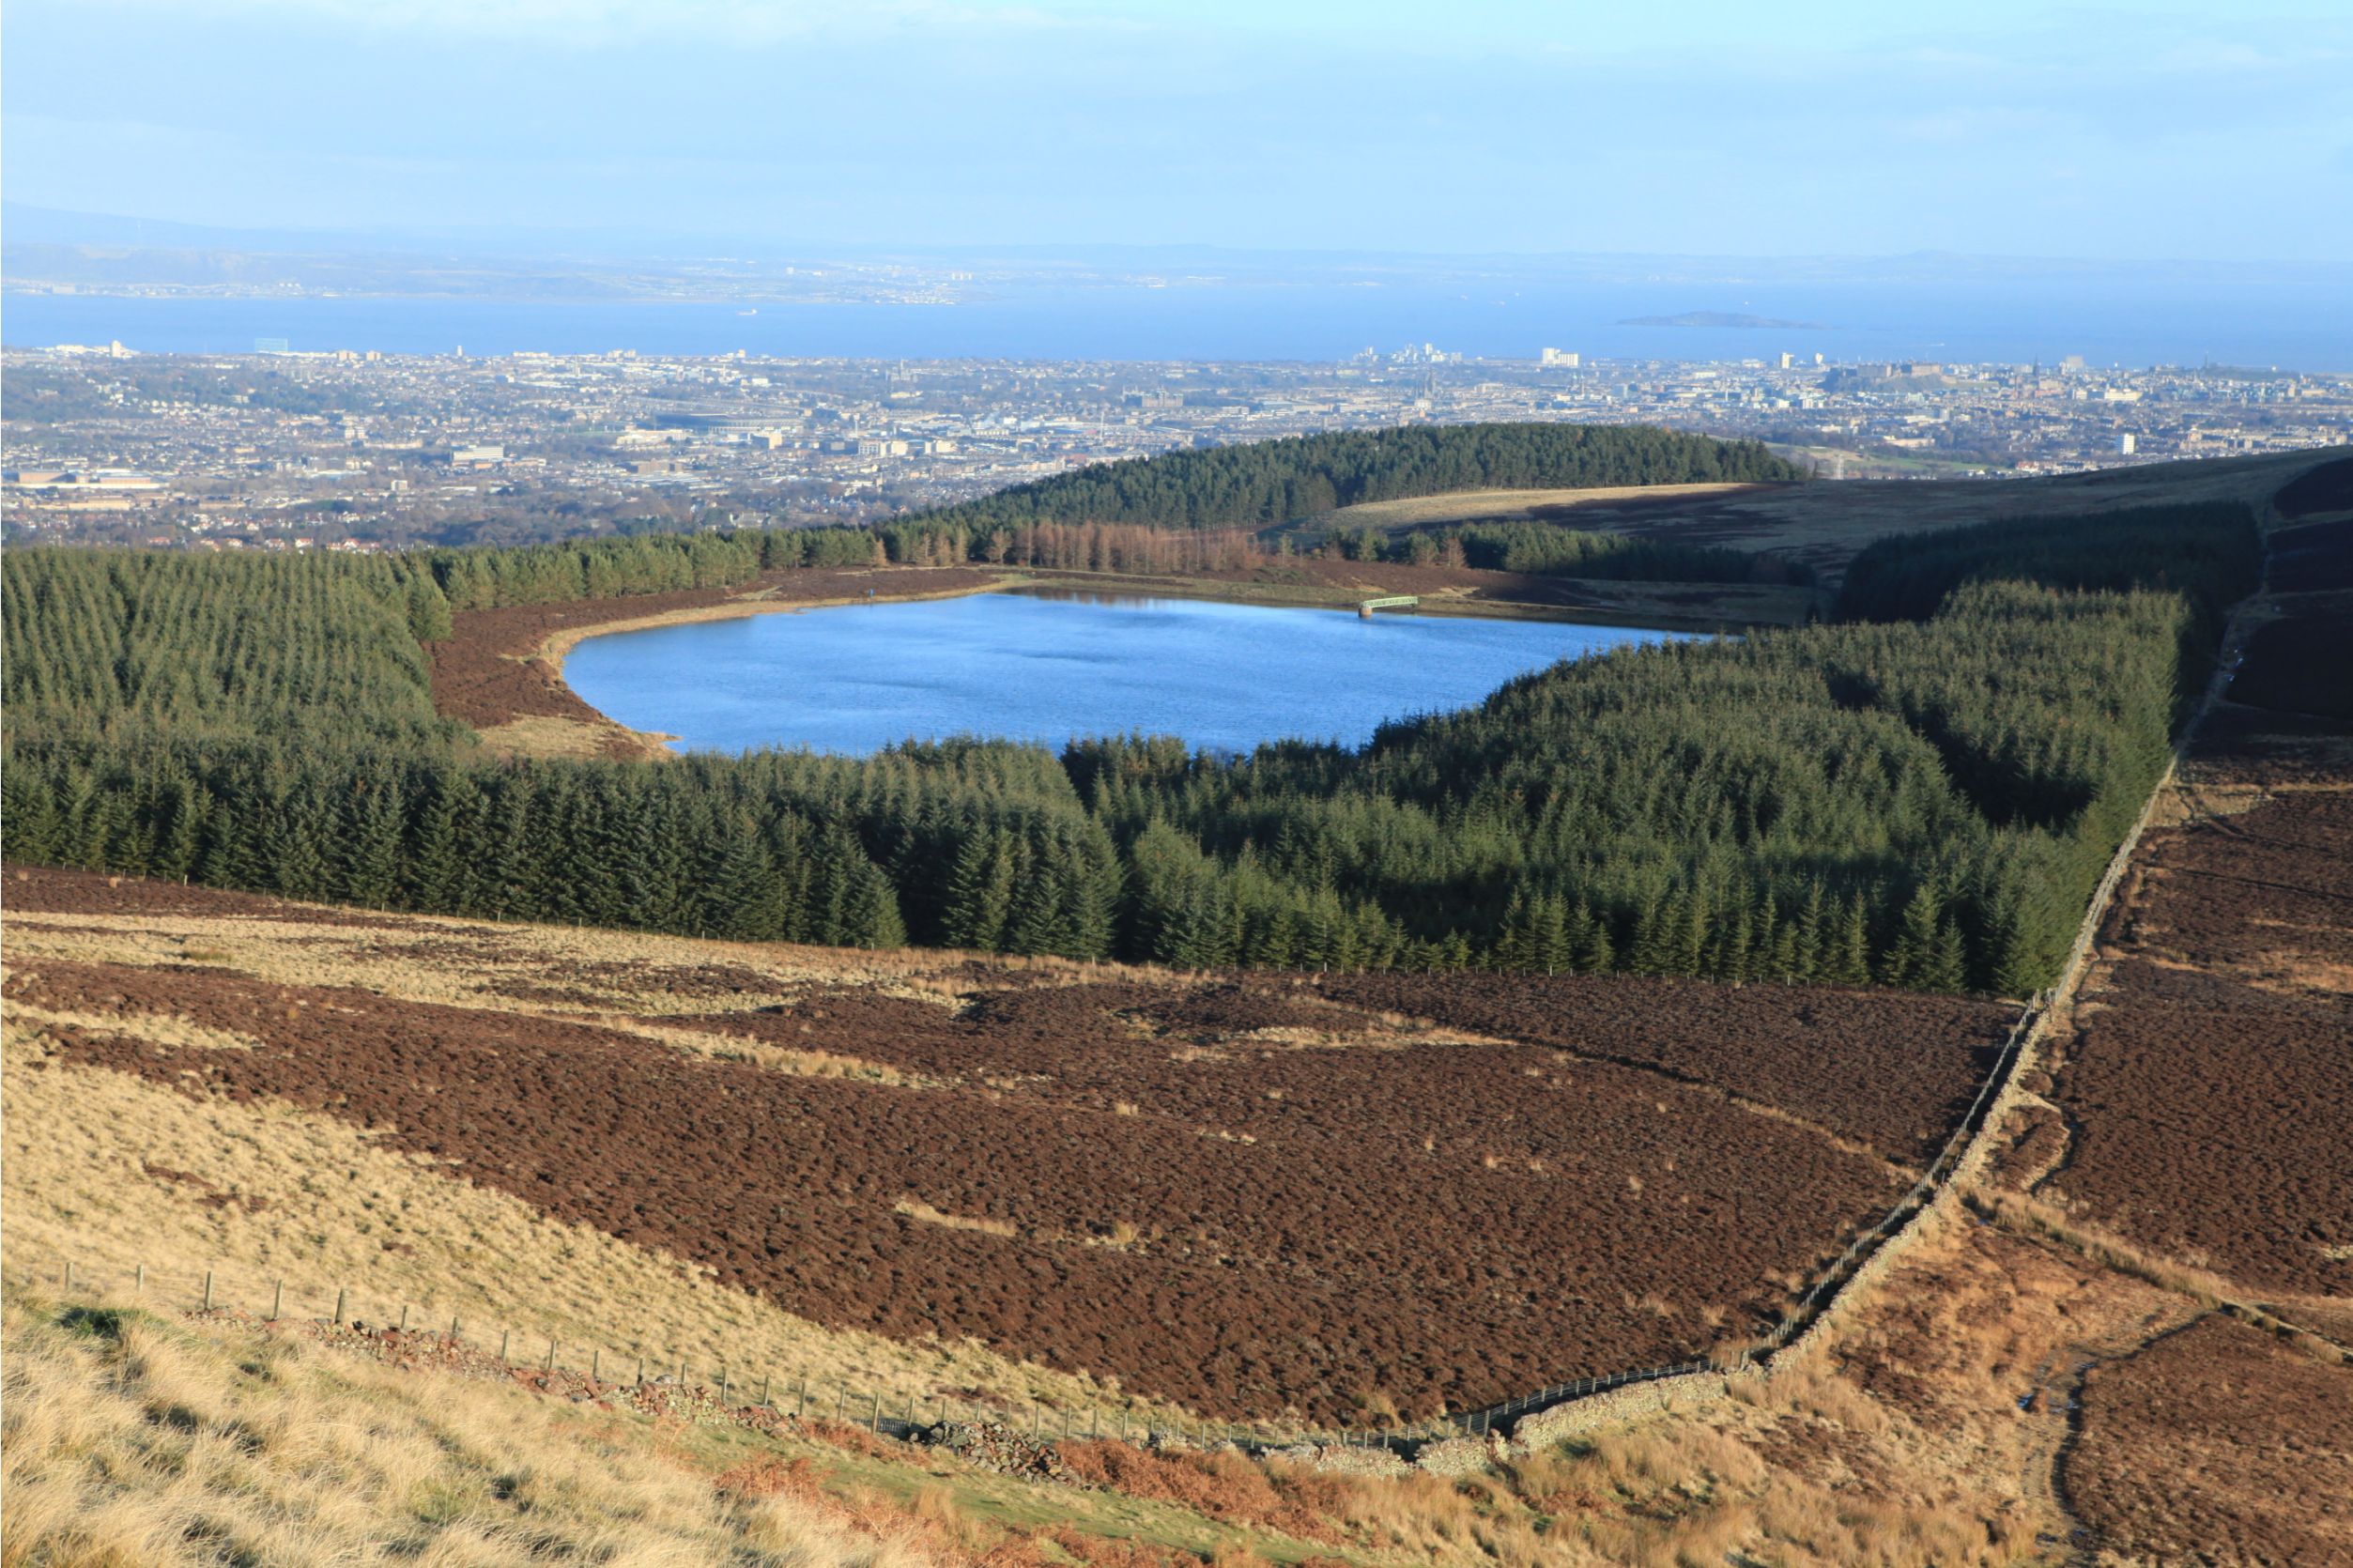 Bonaly Reservoir from the top of Harbour Hill, looking back over Edinburgh from the Pentland Hills.